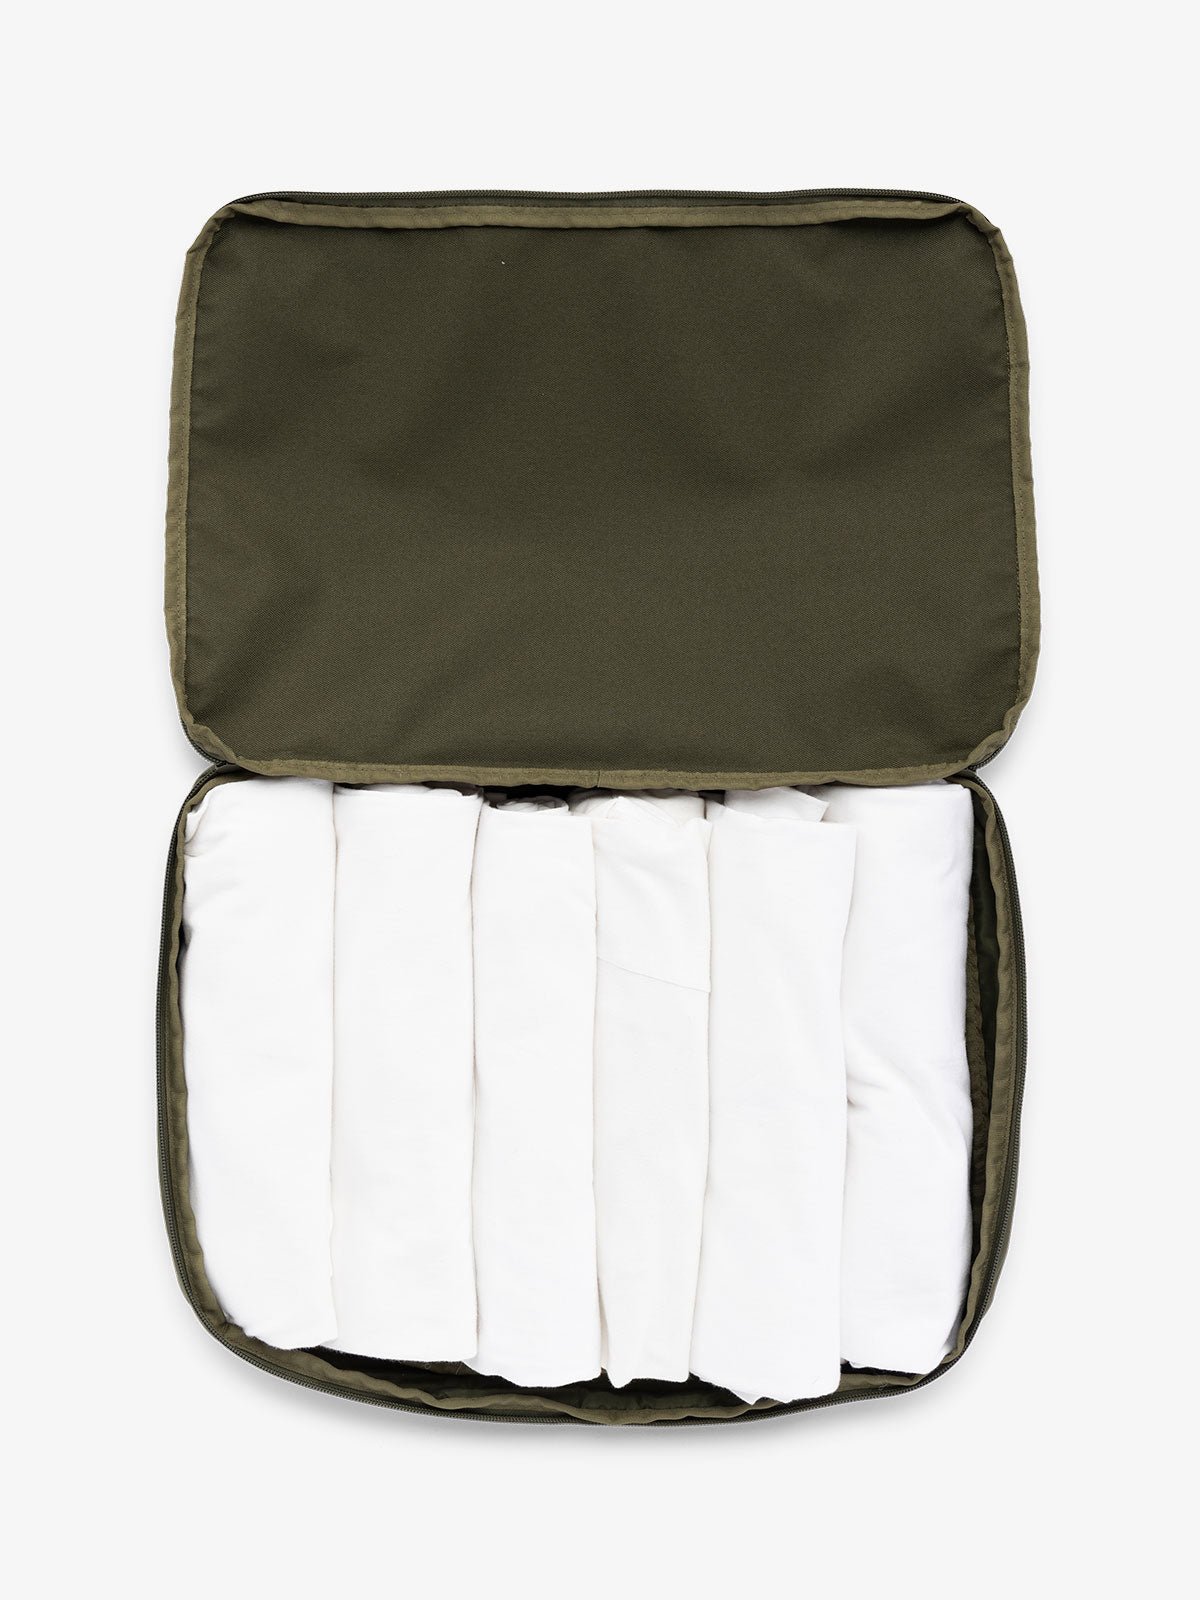 CALPAK large packing cubes for travel made with durable material in moss